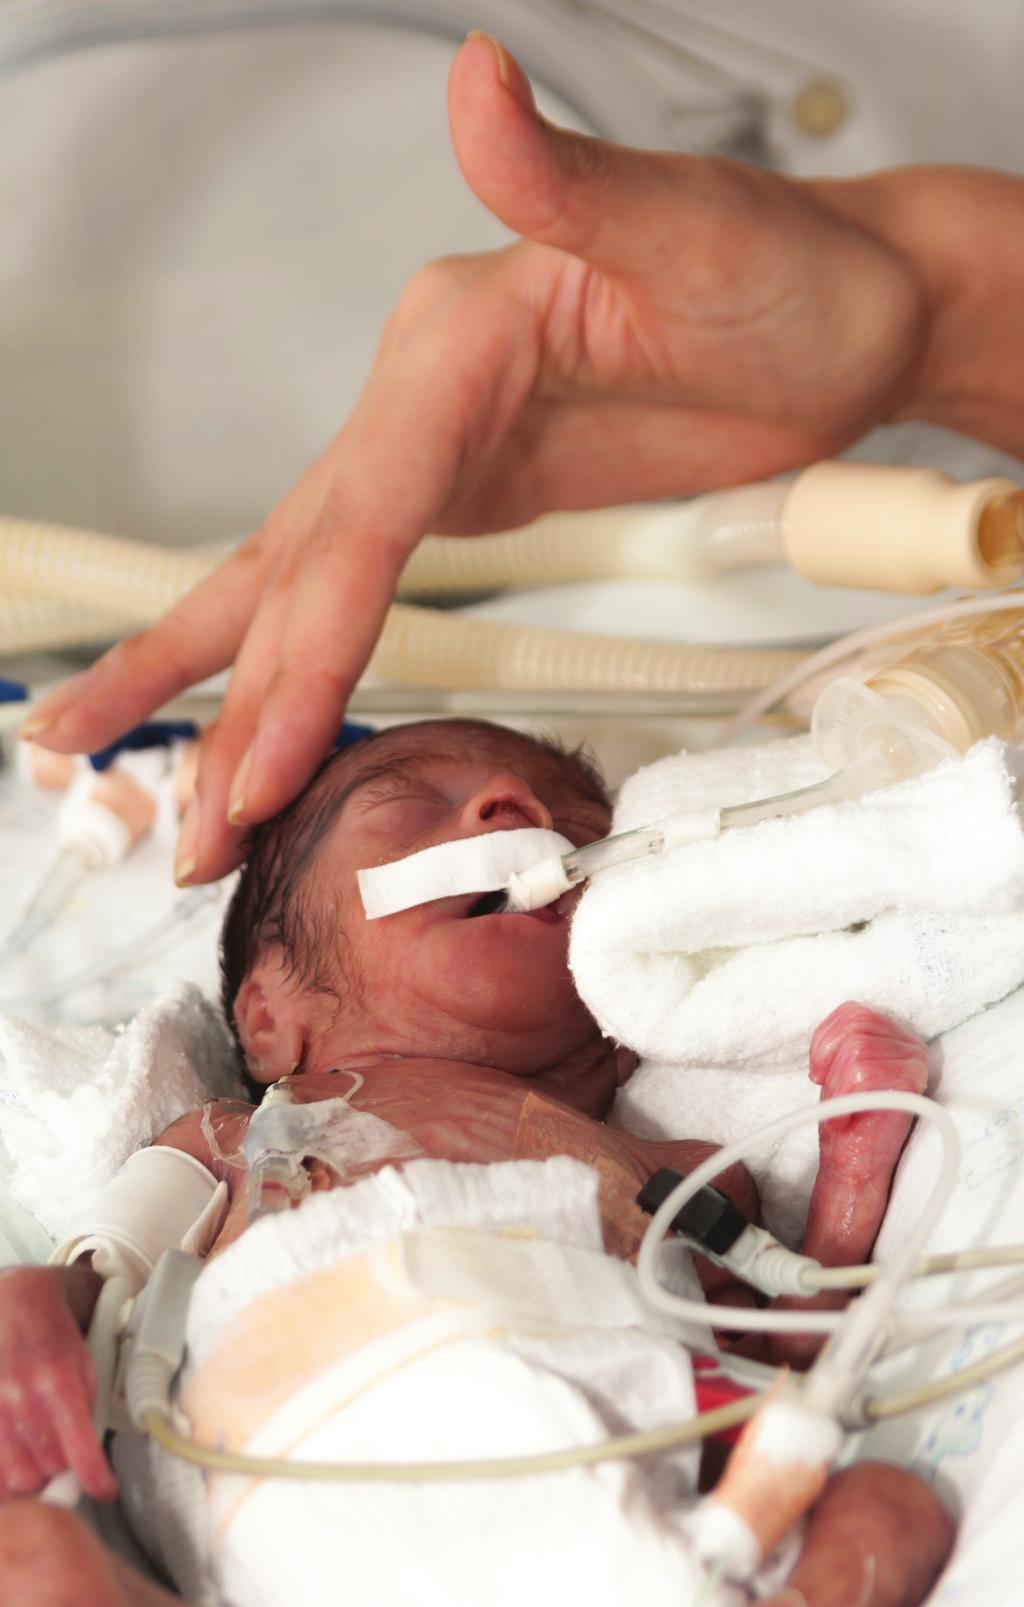 VON 2014 Outcomes VLBW Infants: Helping the Smallest Survive and Thrive Our outcomes and survival rates demonstrate that micro-preemies---a subset of VLBW infants weighing 1,000 grams or less--fare